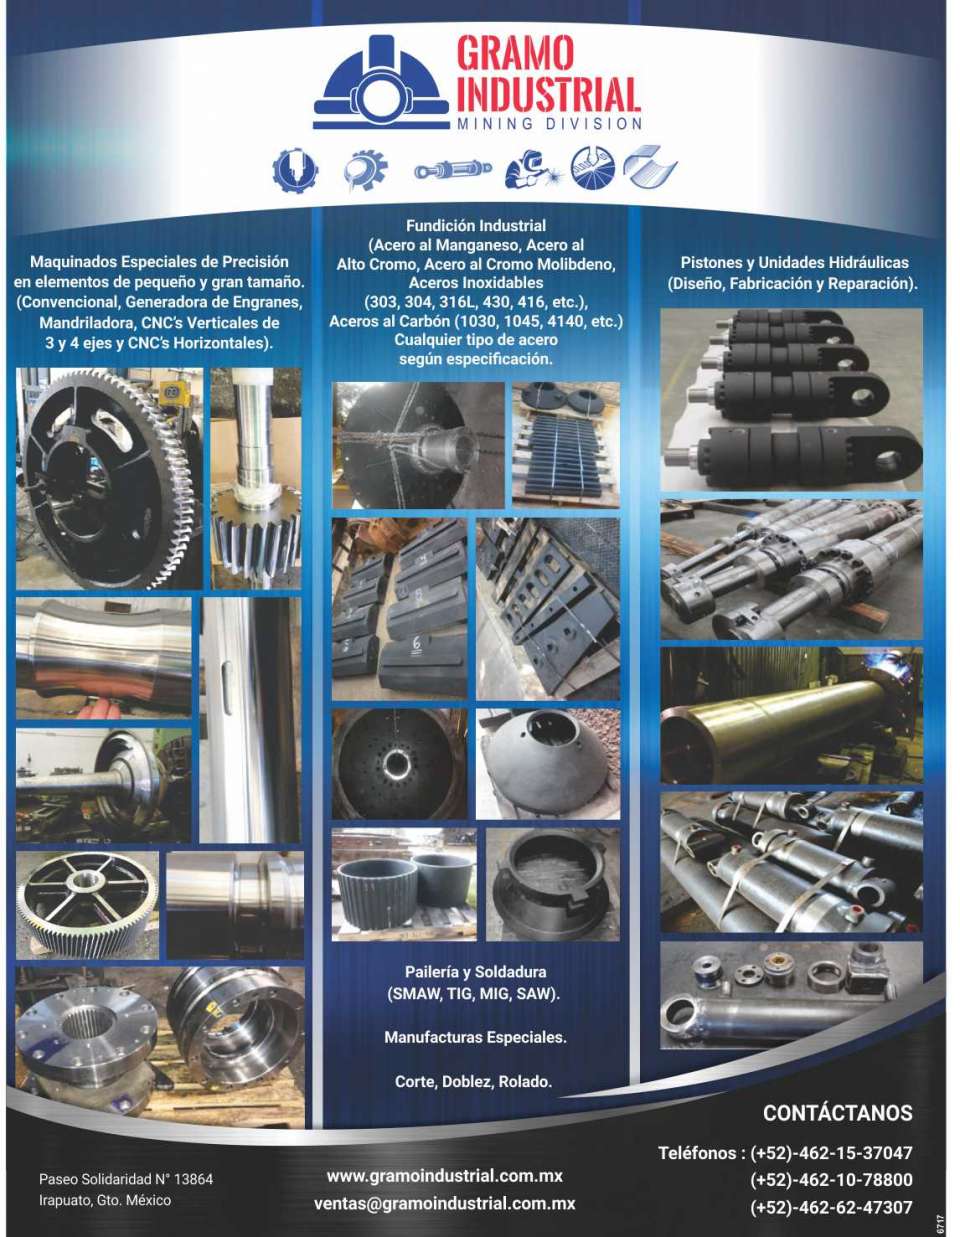 Mechanical Equipment (Specialists in Manufacturing), Electromechanical and Integral Services, Metal Mechanics. Industrial Machining (Design and Construction), Cutting, Bending, Rolling